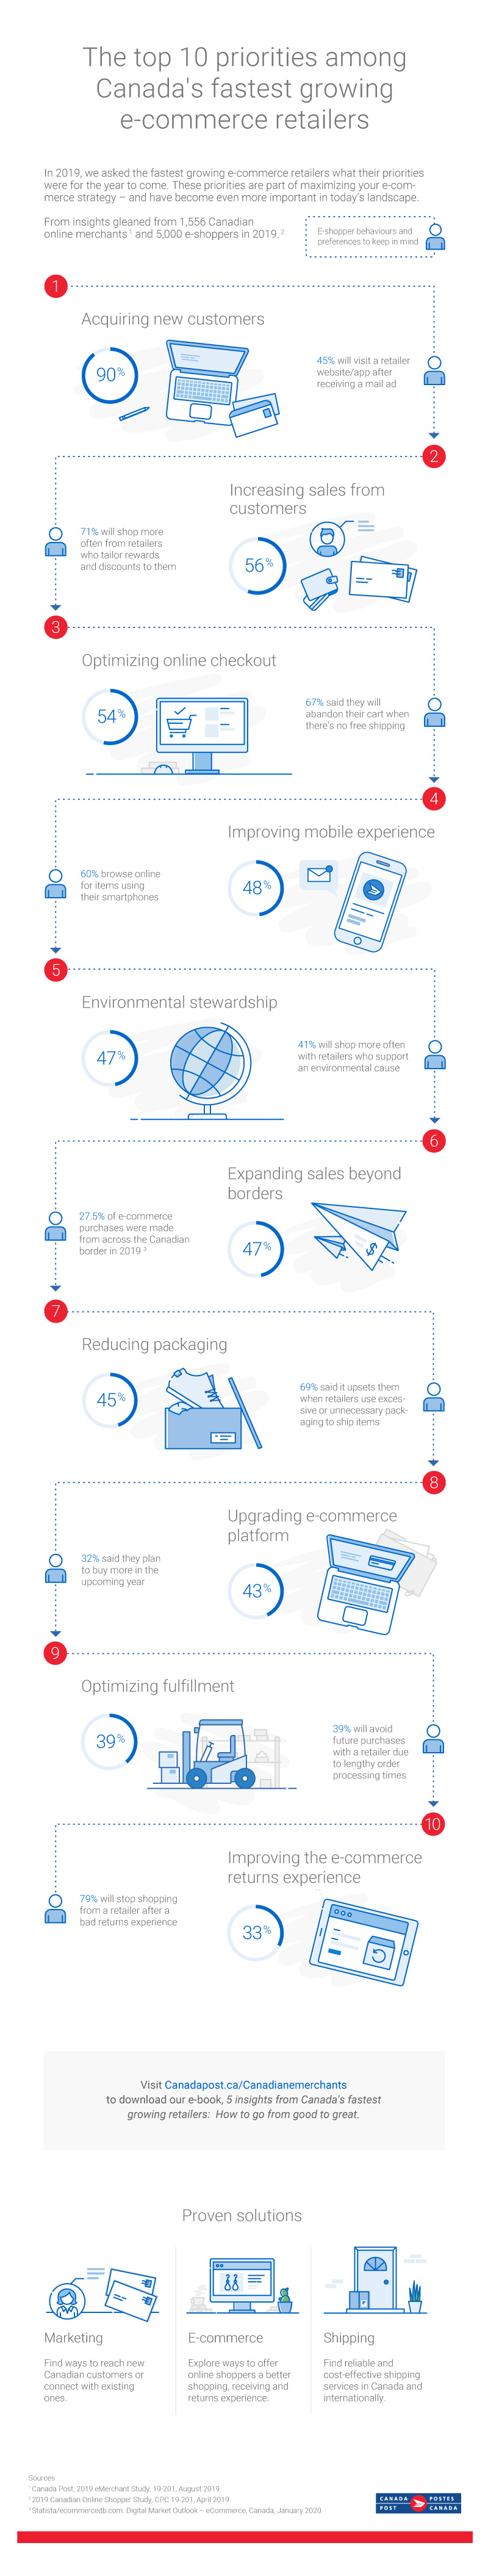 Infographic: The top 10 priorities  among Canada's  fastest growing e-commerce retailers. In 2019, we asked the fastest growing e-commerce retailers what their priorities were for the year to come. These priorities are part of maximizing your e-commerce strategy – and have become even more important in today’s landscape. From insights gleaned from 1,556 Canadian online merchants (Source #1) and 5,000 e-shoppers in 2019. (Source #2) E-shopper behaviours and preferences to keep in mind. 90 % Acquiring new customers. 45% will visit a retailer website/app after receiving a mail ad. 56% Increasing sales from customers. 71% will shop more often from retailers who tailor rewards and discounts to them. 54% Optomizing online checkout.  67% said they will abandon their cart when there's no free shipping. 48% Improving mobile experience.  60% browse online for items using their smartphones. 47% Environmental stewardship. 41% will shop more often with retailers who support an environmental cause. 47% Expanding sales beyong borders. 27.5% of e-commerce purchases were made from across the Canadian border in 2019 (Source #3). 45% Reducing packages. 69% say it upsets them when retailers use excessive or unnecessary packaging to ship items. 43% Upgrading e-commerce platform. 32% say they plan to buy more in the upcoming year. 39% Optimizing fulfilment.  39% will avoid future purchases with a retailer due to lengthy order processing times. 33% Improving the e-commerce returns experience.  79% will stop shopping from a retailer after a bad returns experience. Proven Solutions: Marketing: Find ways to reach new Canadian customers or connect with existing ones. E-commerce: Explore ways to offer online shoppers a better shopping, receiving and returns experience. Shipping: Find reliable and cost-effective shipping services in Canada and internationally.  Scale up your business! Talk to your sales representative or visit Canadapost.ca/canadianemerchants to download our e-book, 5 insights from Canada’s fastest-growing retailers: How to go from good to great. Visit Canadapost.ca/Canadianemerchants to download our e-book, 5 insights from Canada's fastest growing retailers: How to go from good to great. Sources:  1. Canada Post. 2019 eMerchant Study, 19-201, August 2019 2. 2019 Canadian Online Shopper Study, CPC 19-201, April 2019.  3. Statista/ecommercedb.com. Digital Market Outlook – eCommerce, Canada, January 2020.